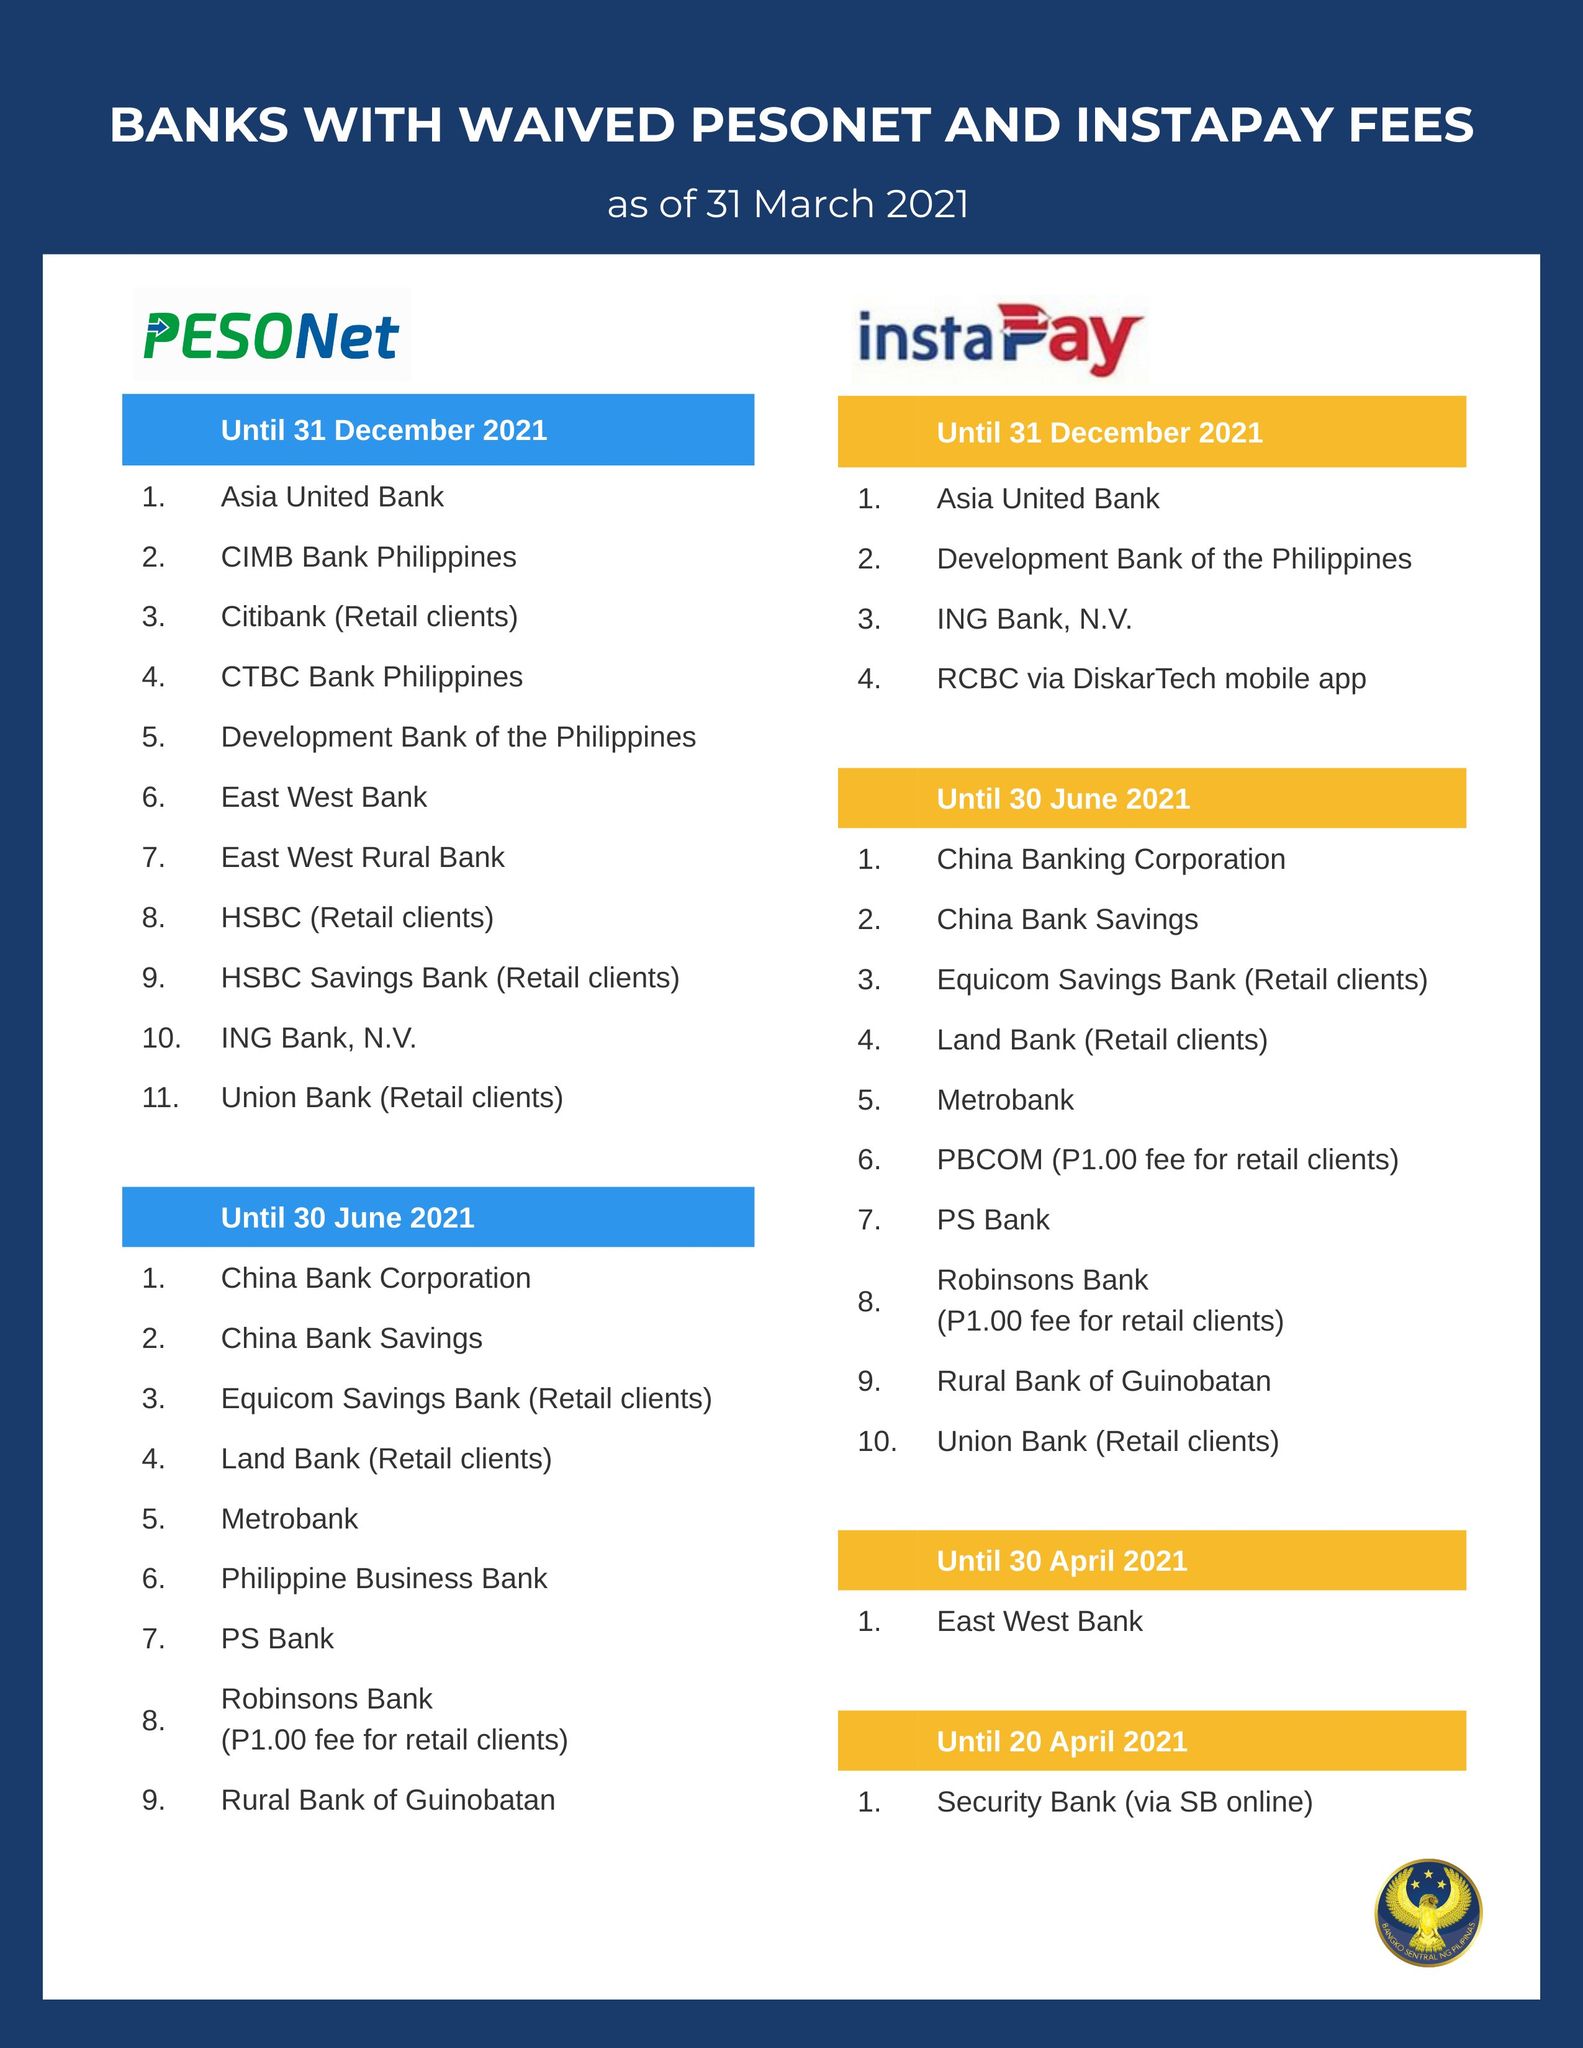 LIST: BSP says more banks extend waived fees for InstaPay, PESONet 1